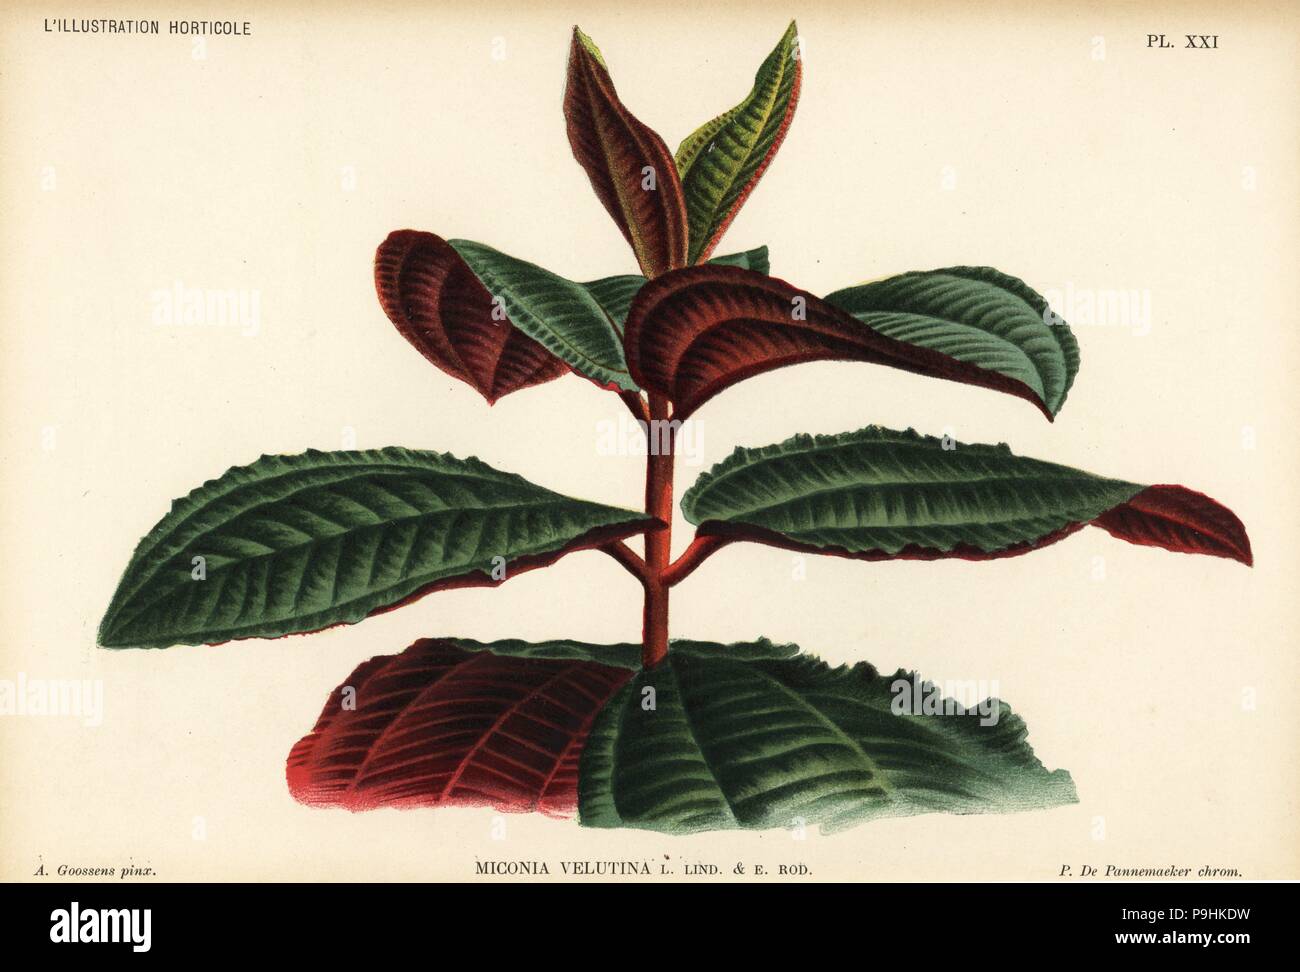 Miconia velutina. Chromolithograph by P. de Pannemaeker after an illustration by A. Goossens from Jean Linden's l'Illustration Horticole, Brussels, 1894. Stock Photo